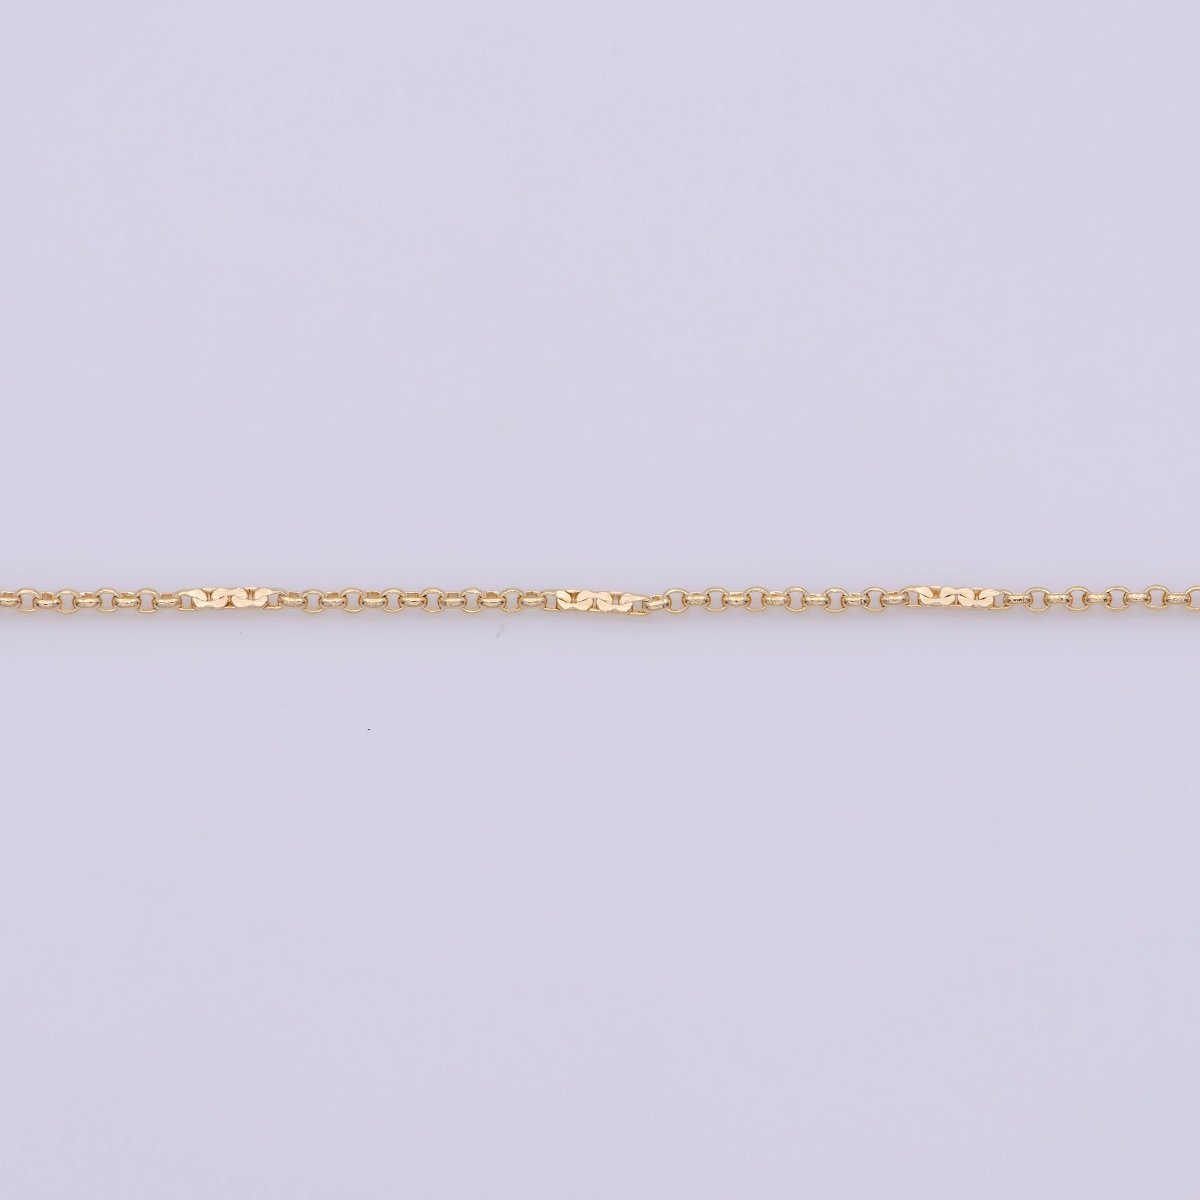 17.7 inch Rolo Chain Necklace, 18K Gold Plated Finished Chain For Jewelry Making, Dainty 1mm Rolo Necklace w/ Spring Ring | CN-576 Clearance Pricing - DLUXCA